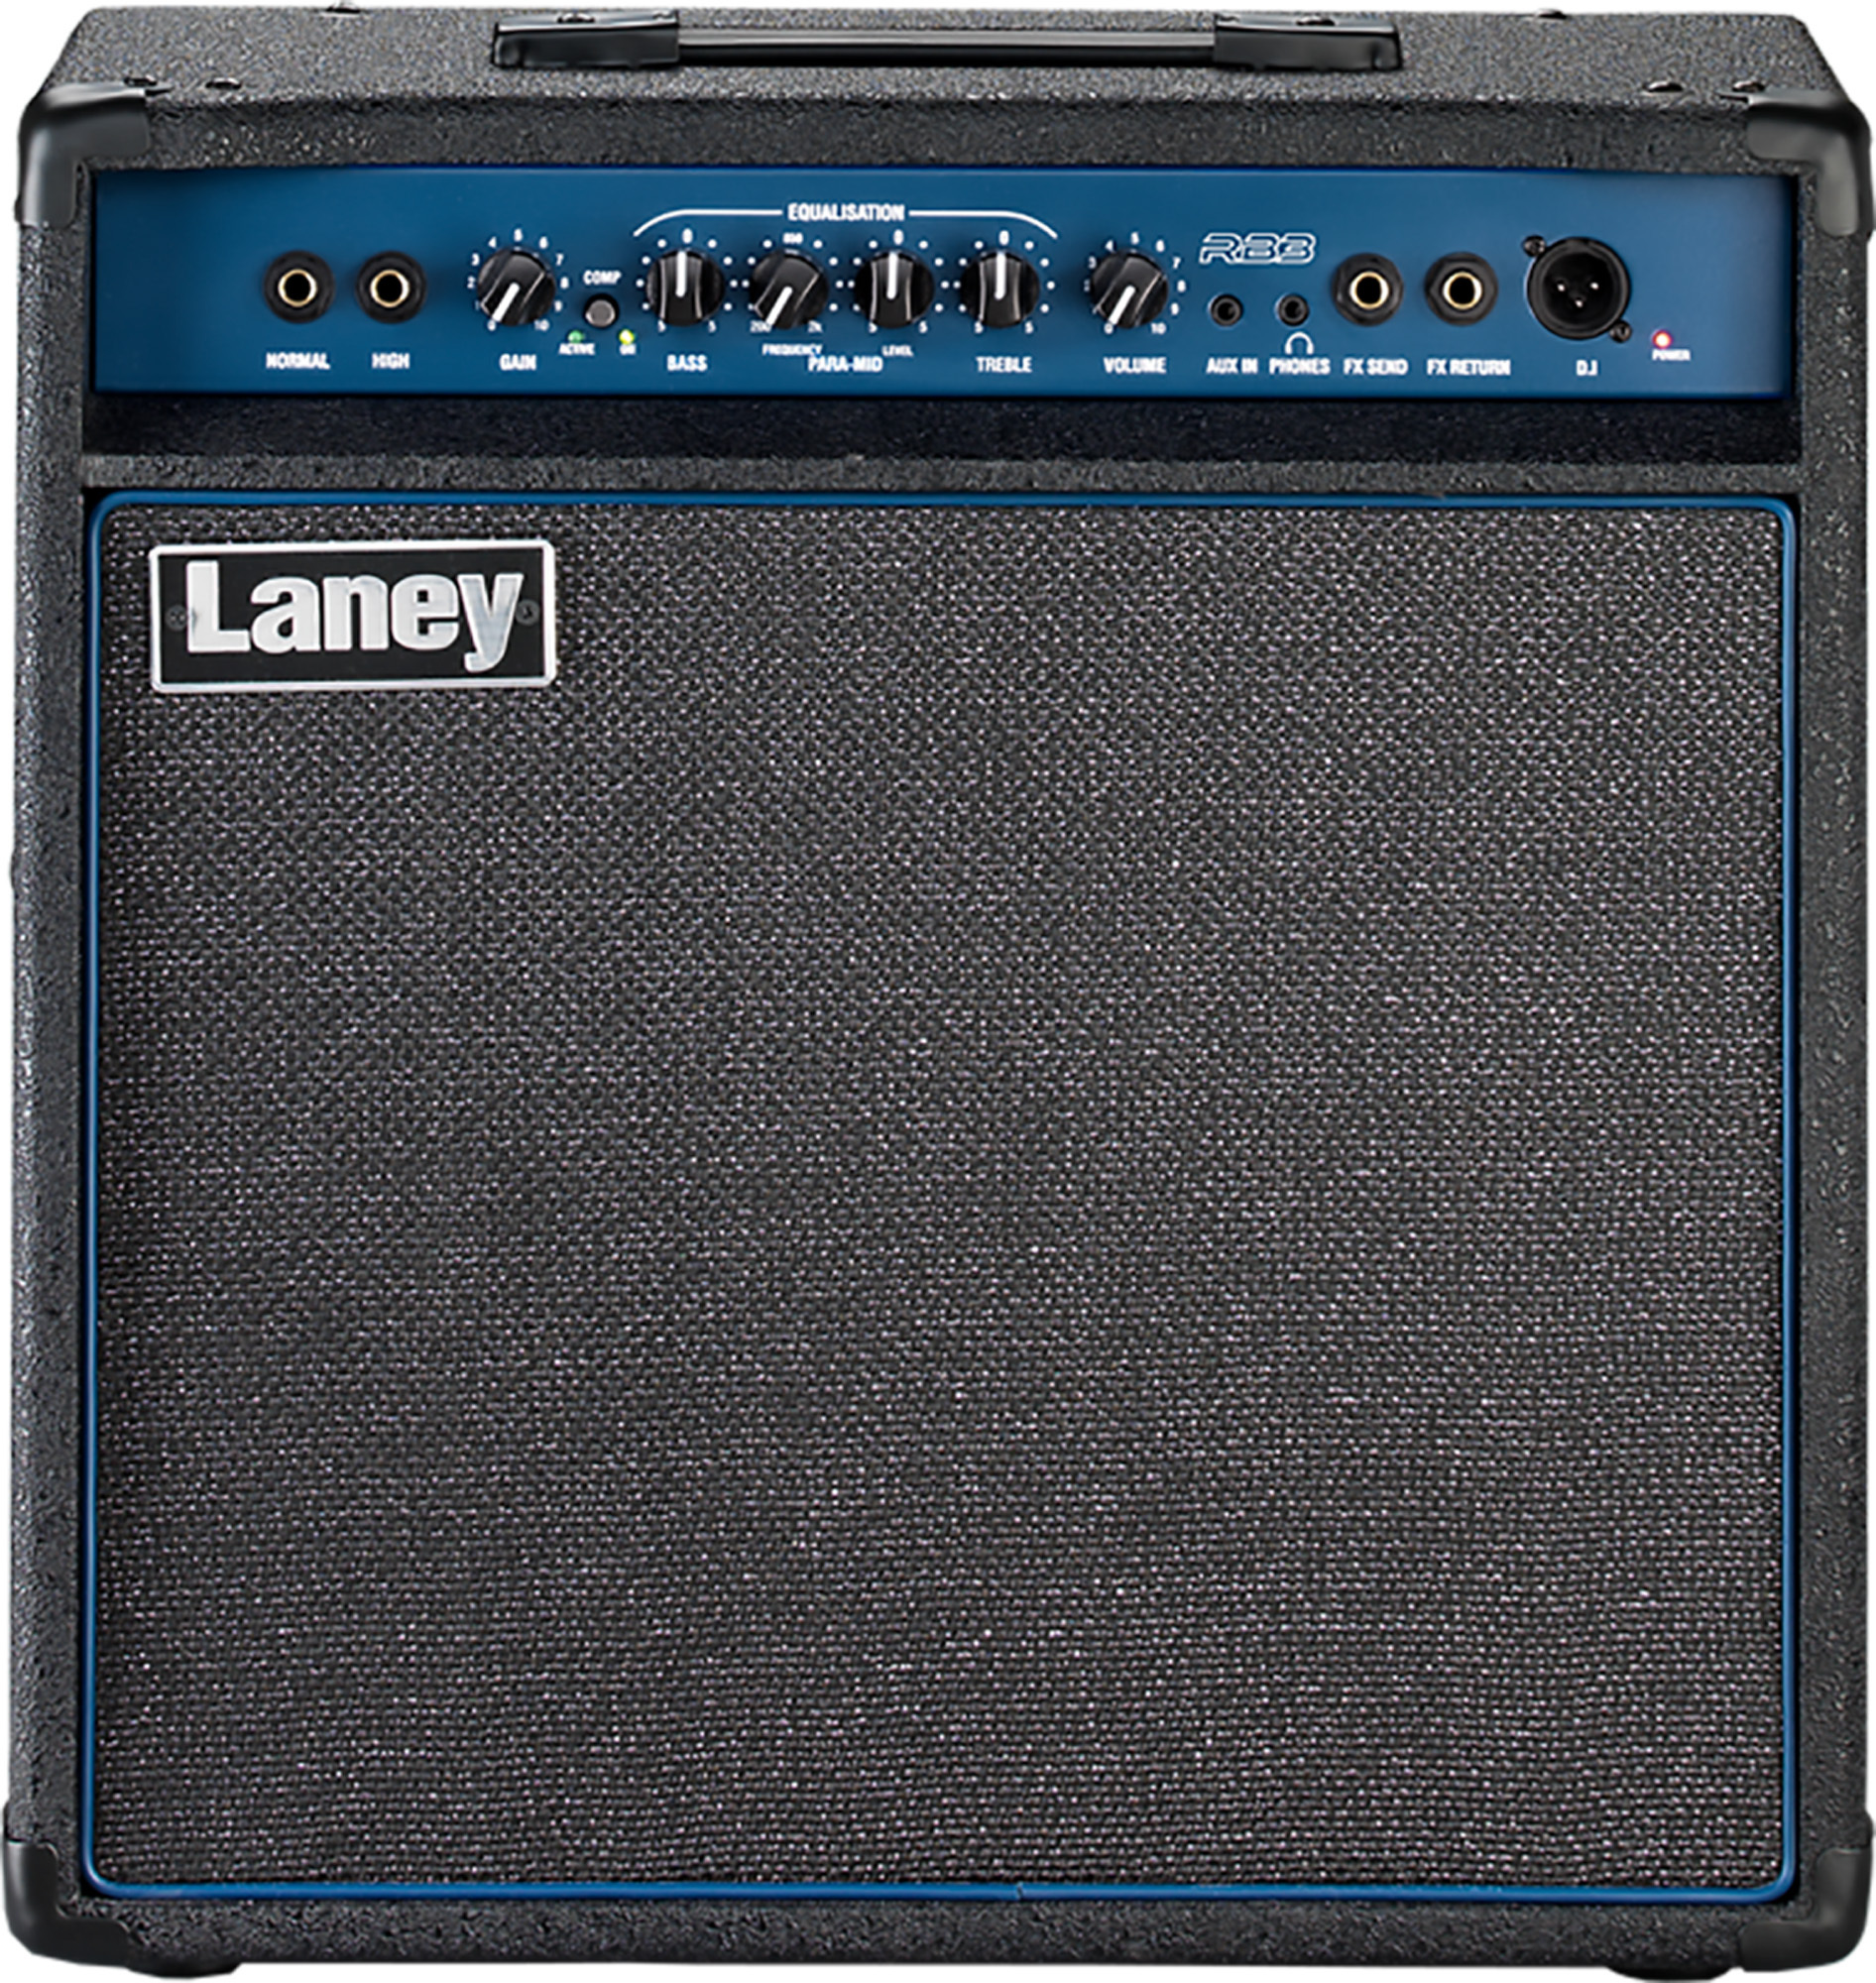 Laney Rb3 - Bass combo amp - Main picture